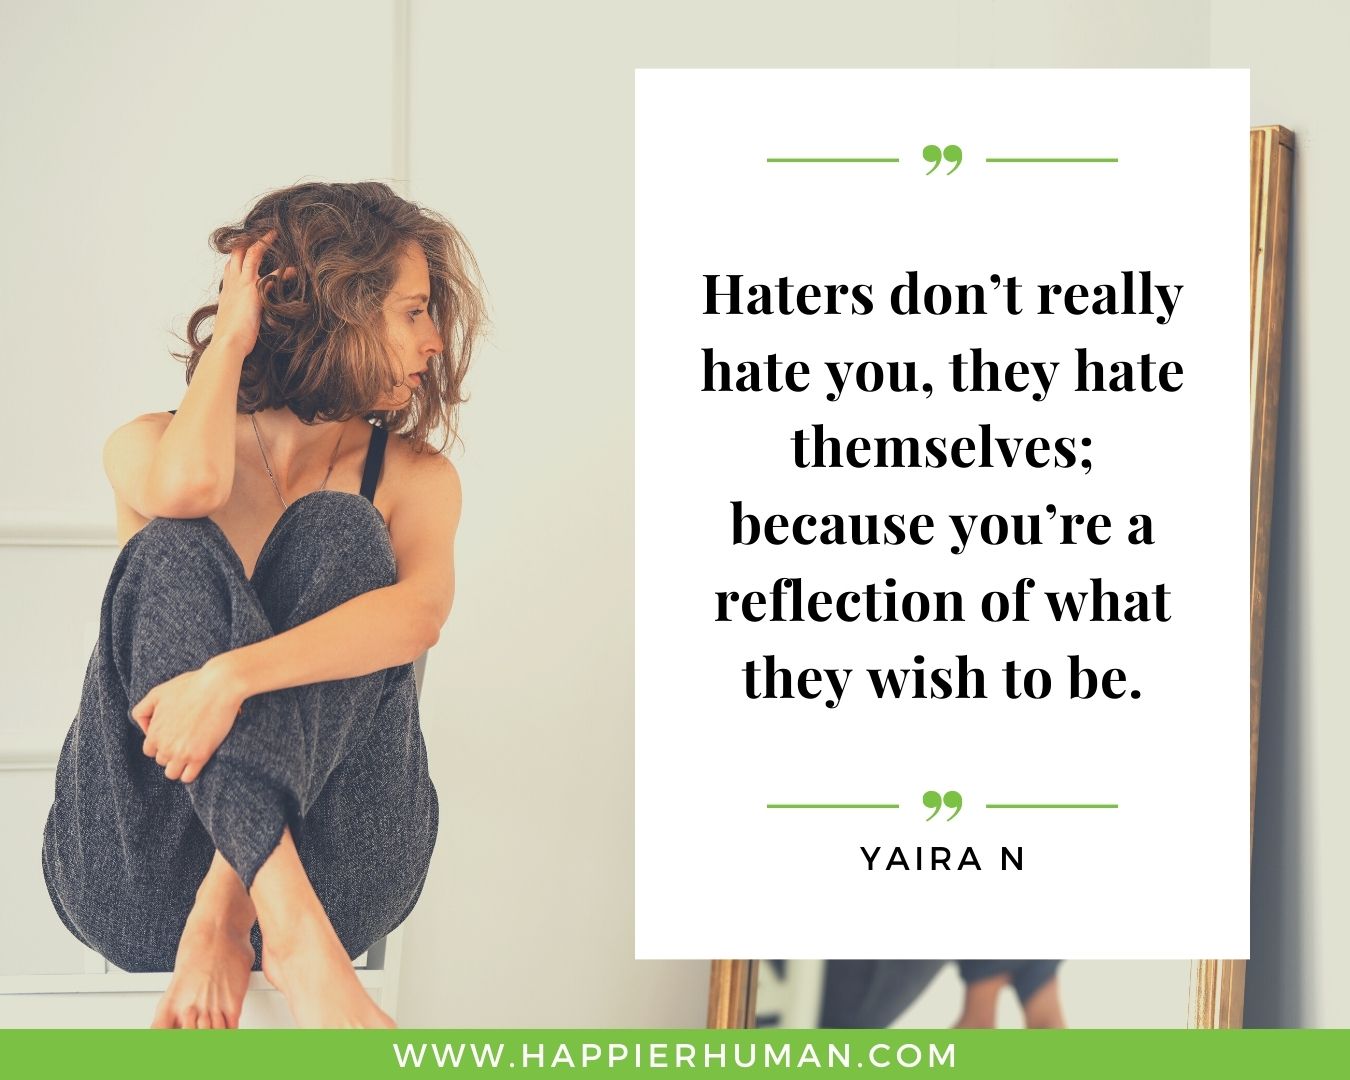 Haters Quotes - “Haters don’t really hate you, they hate themselves; because you’re a reflection of what they wish to be.” - Yaira N